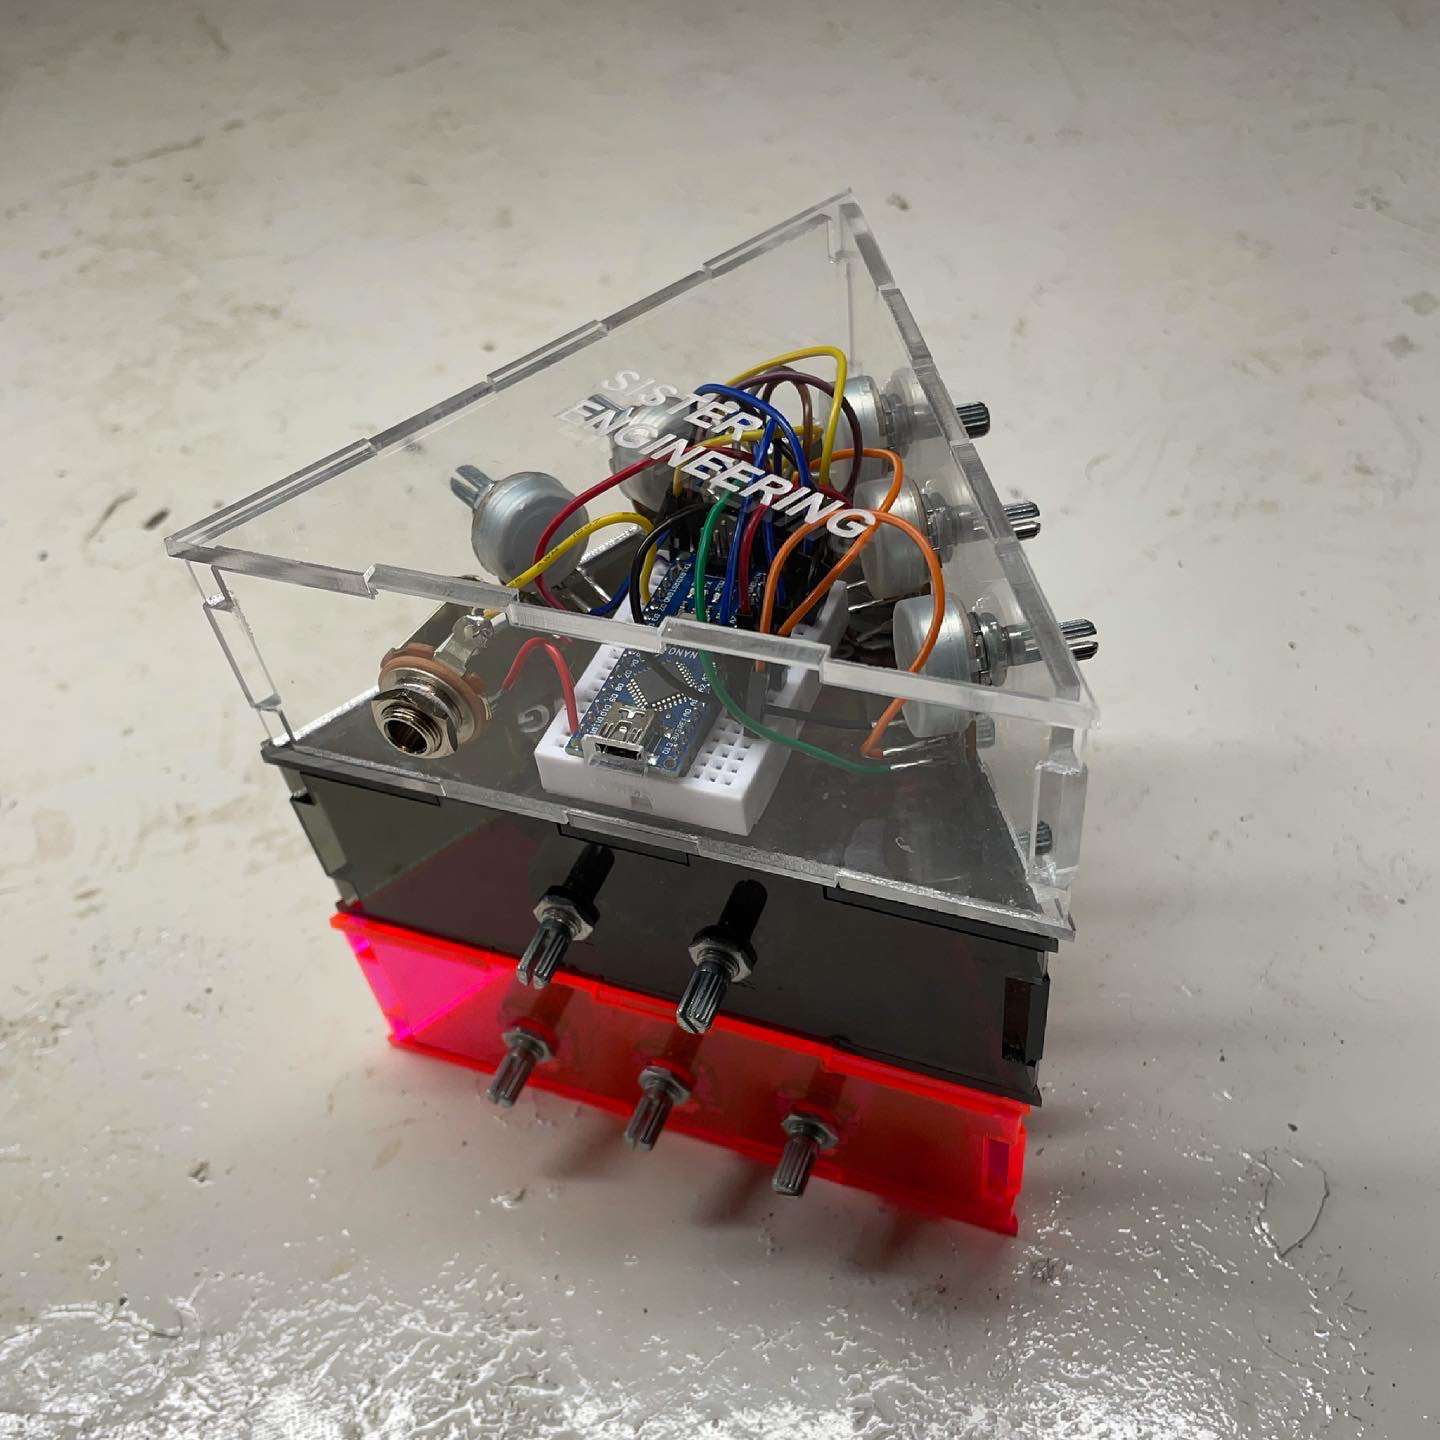 Transparent synthesizer with electronics